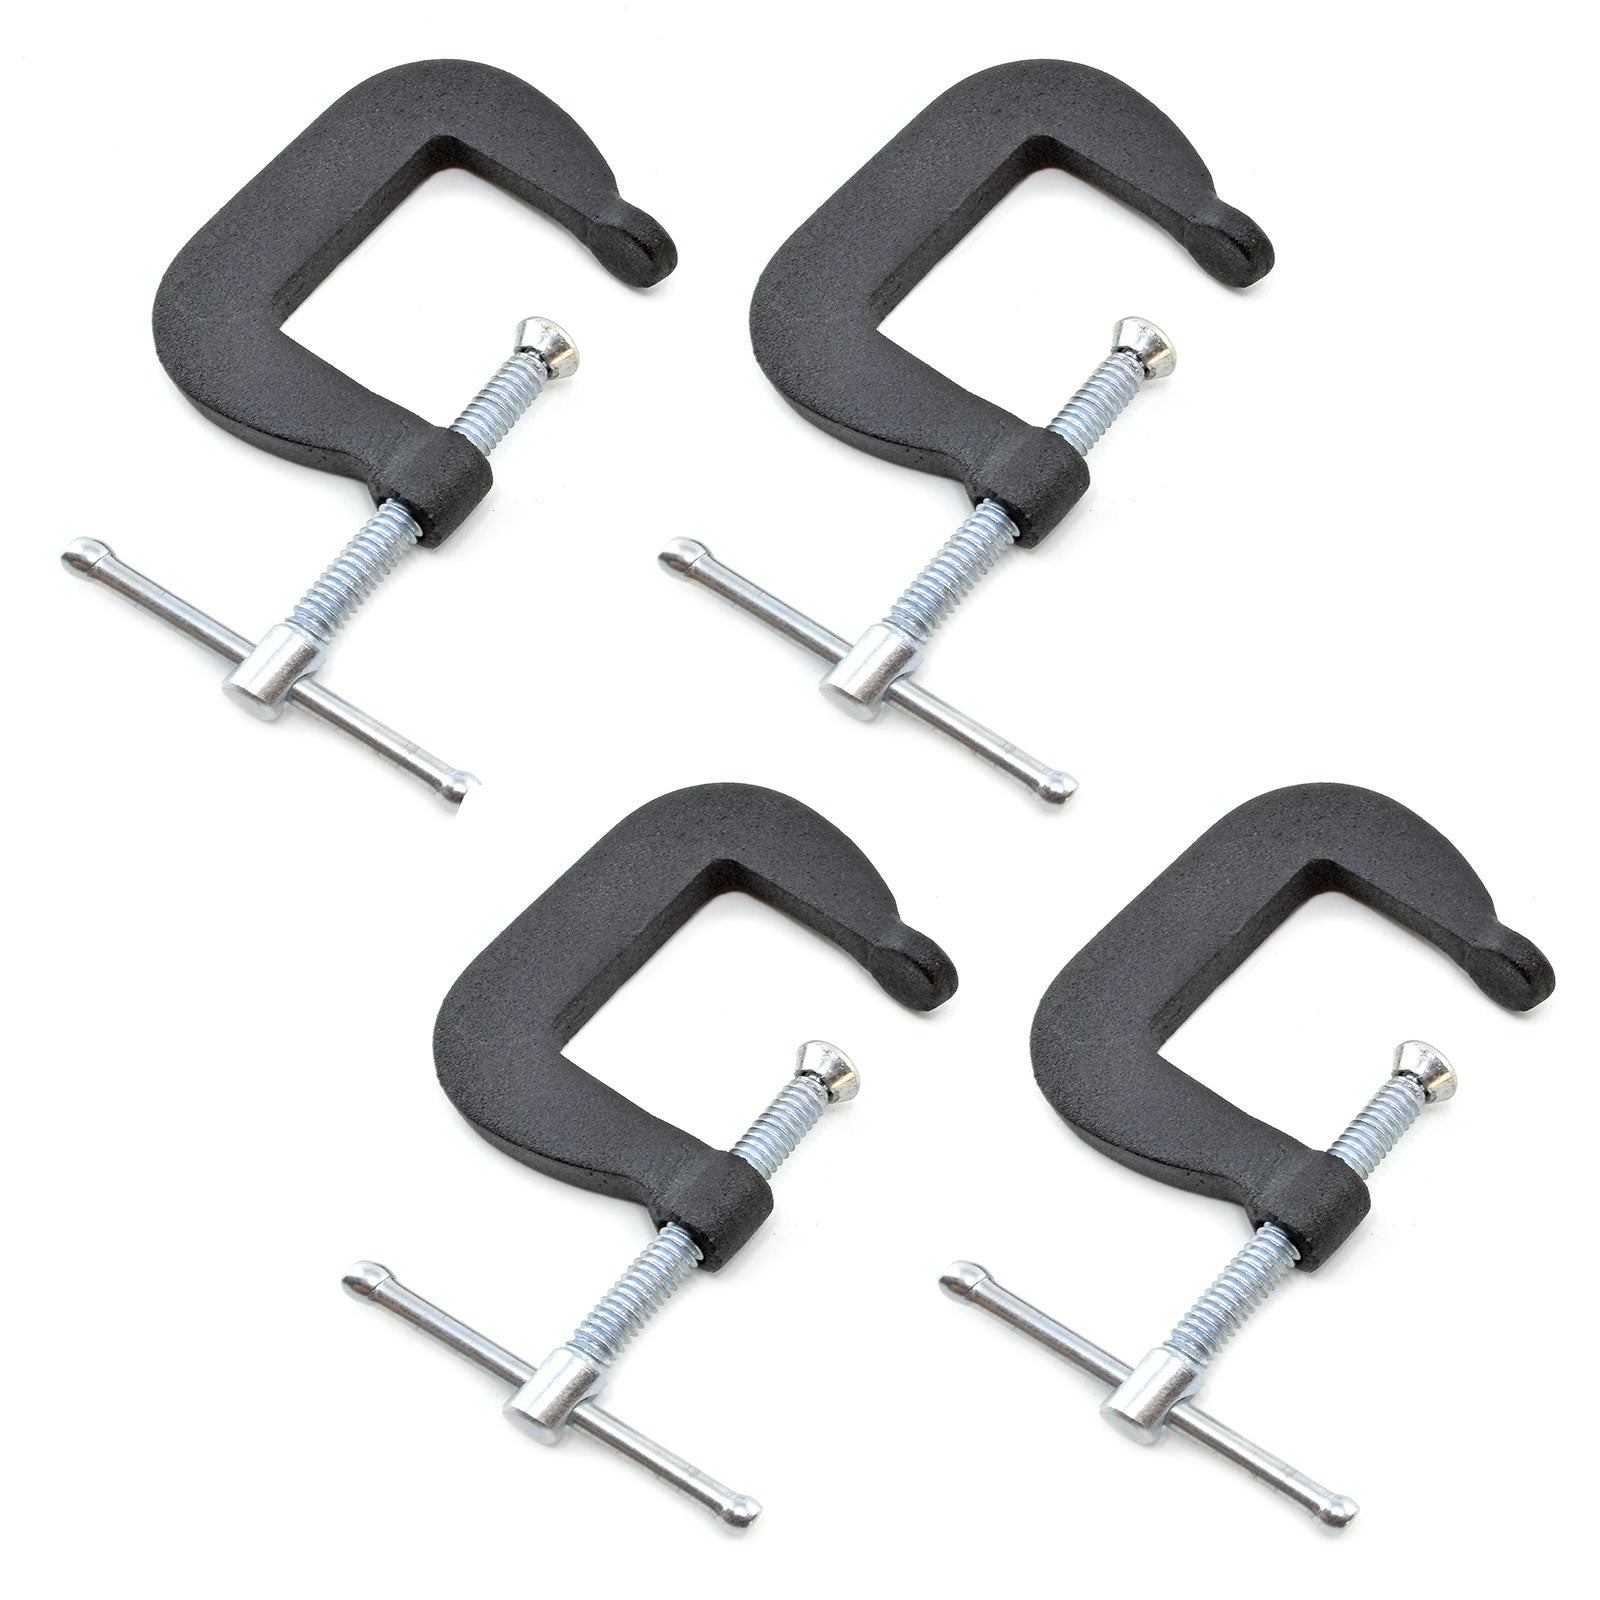 1.25" x 1.25" Miniature Forged Steel C - clamp, Set of 4